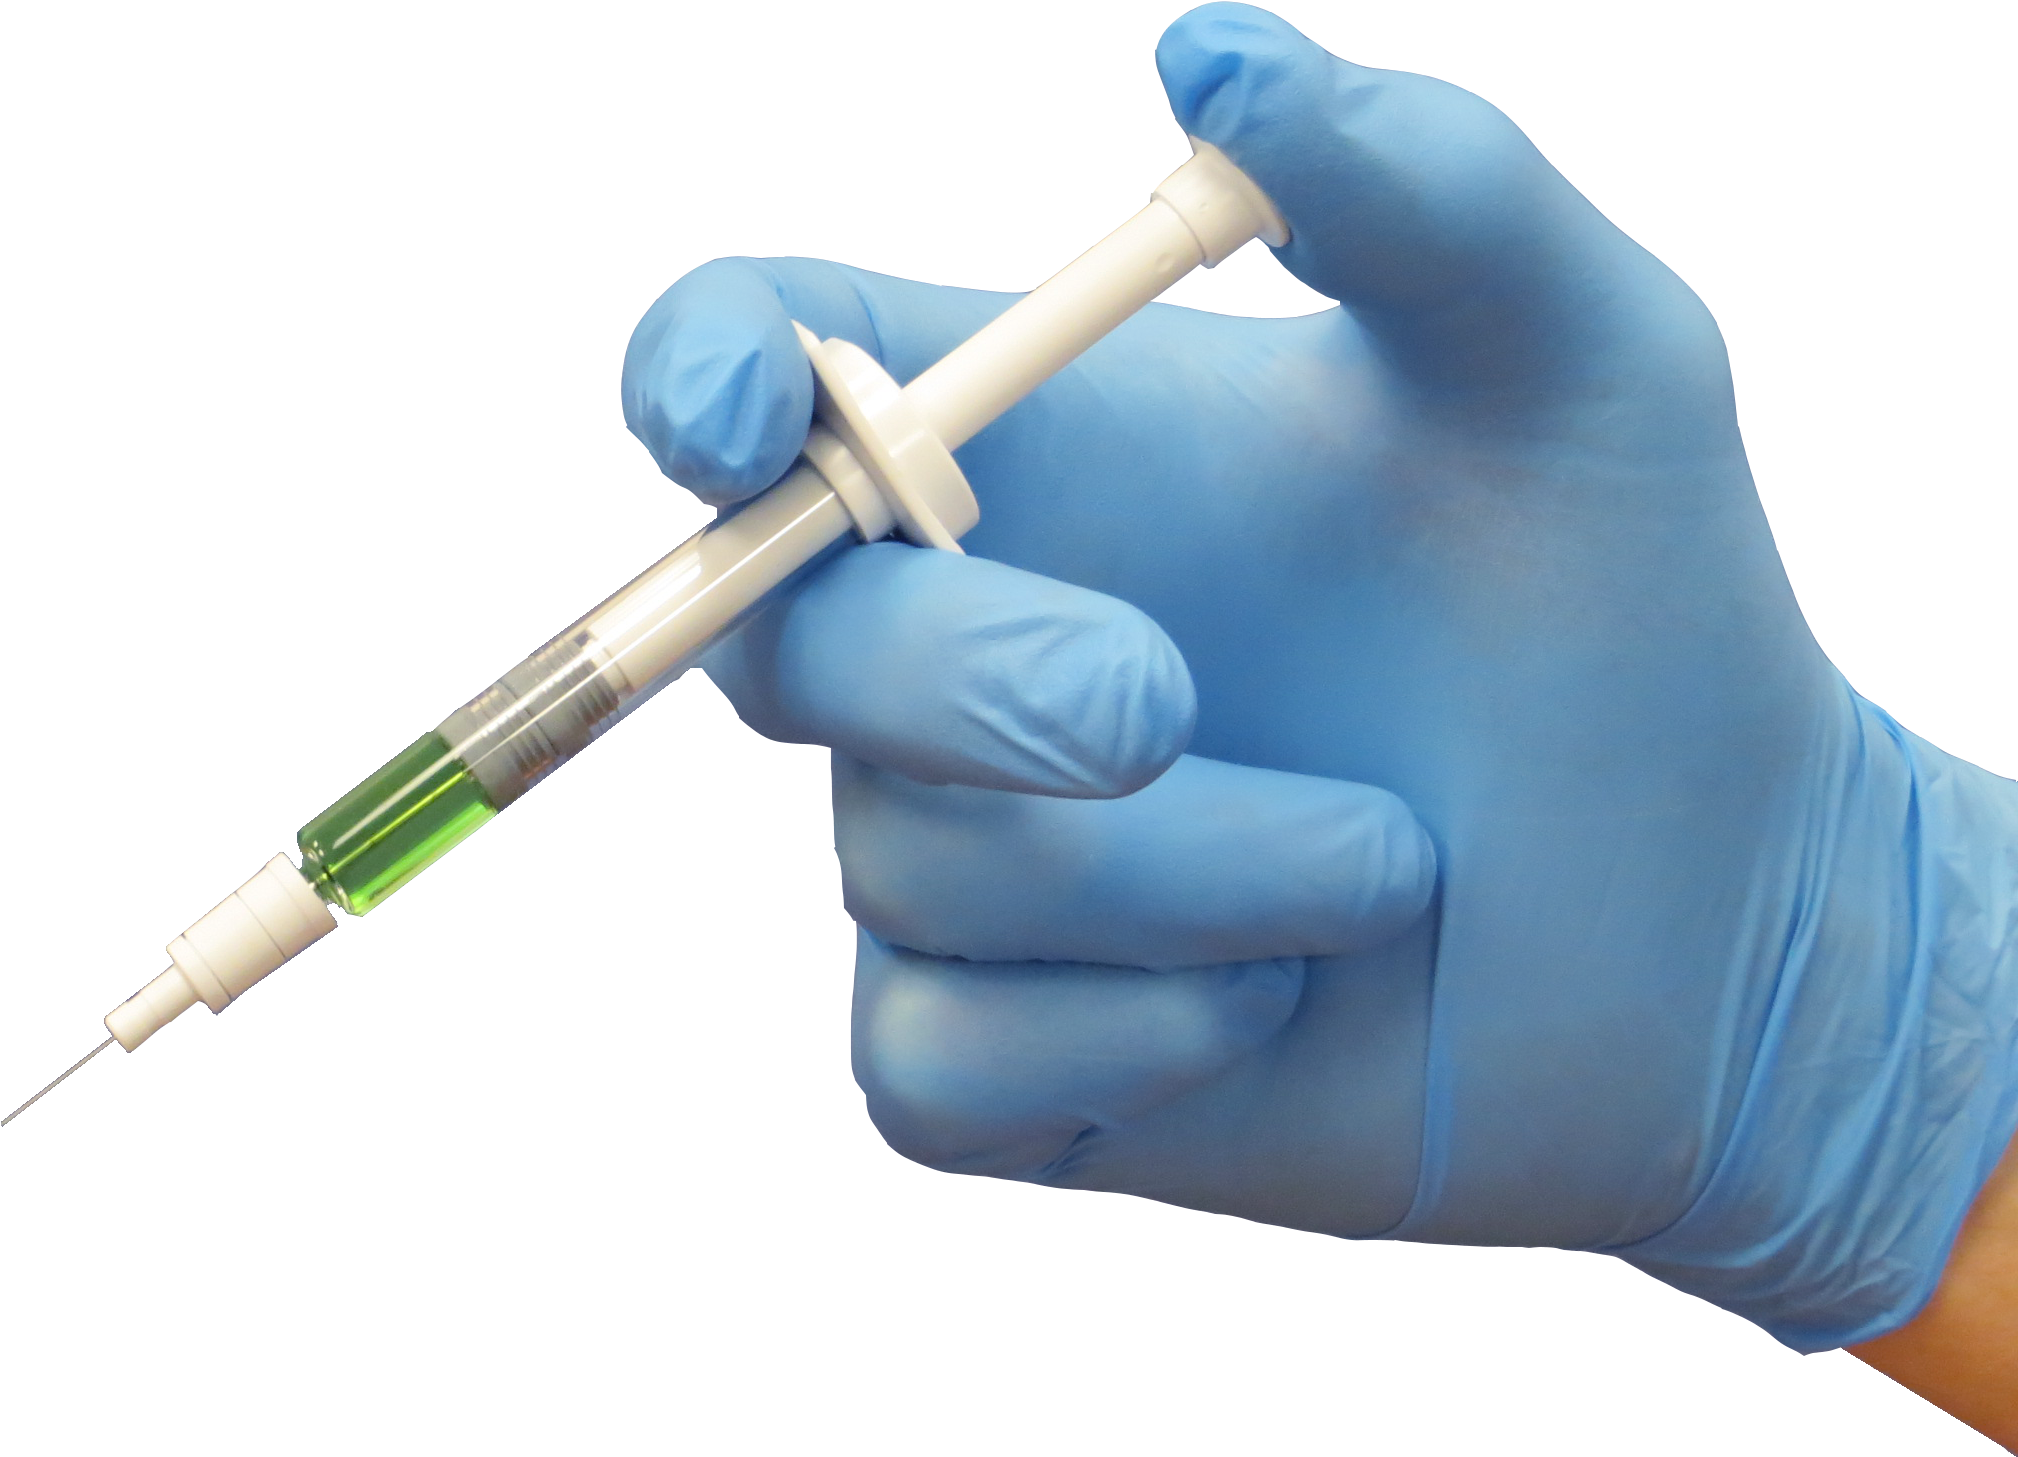 Medical Syringe In Hand Isolated